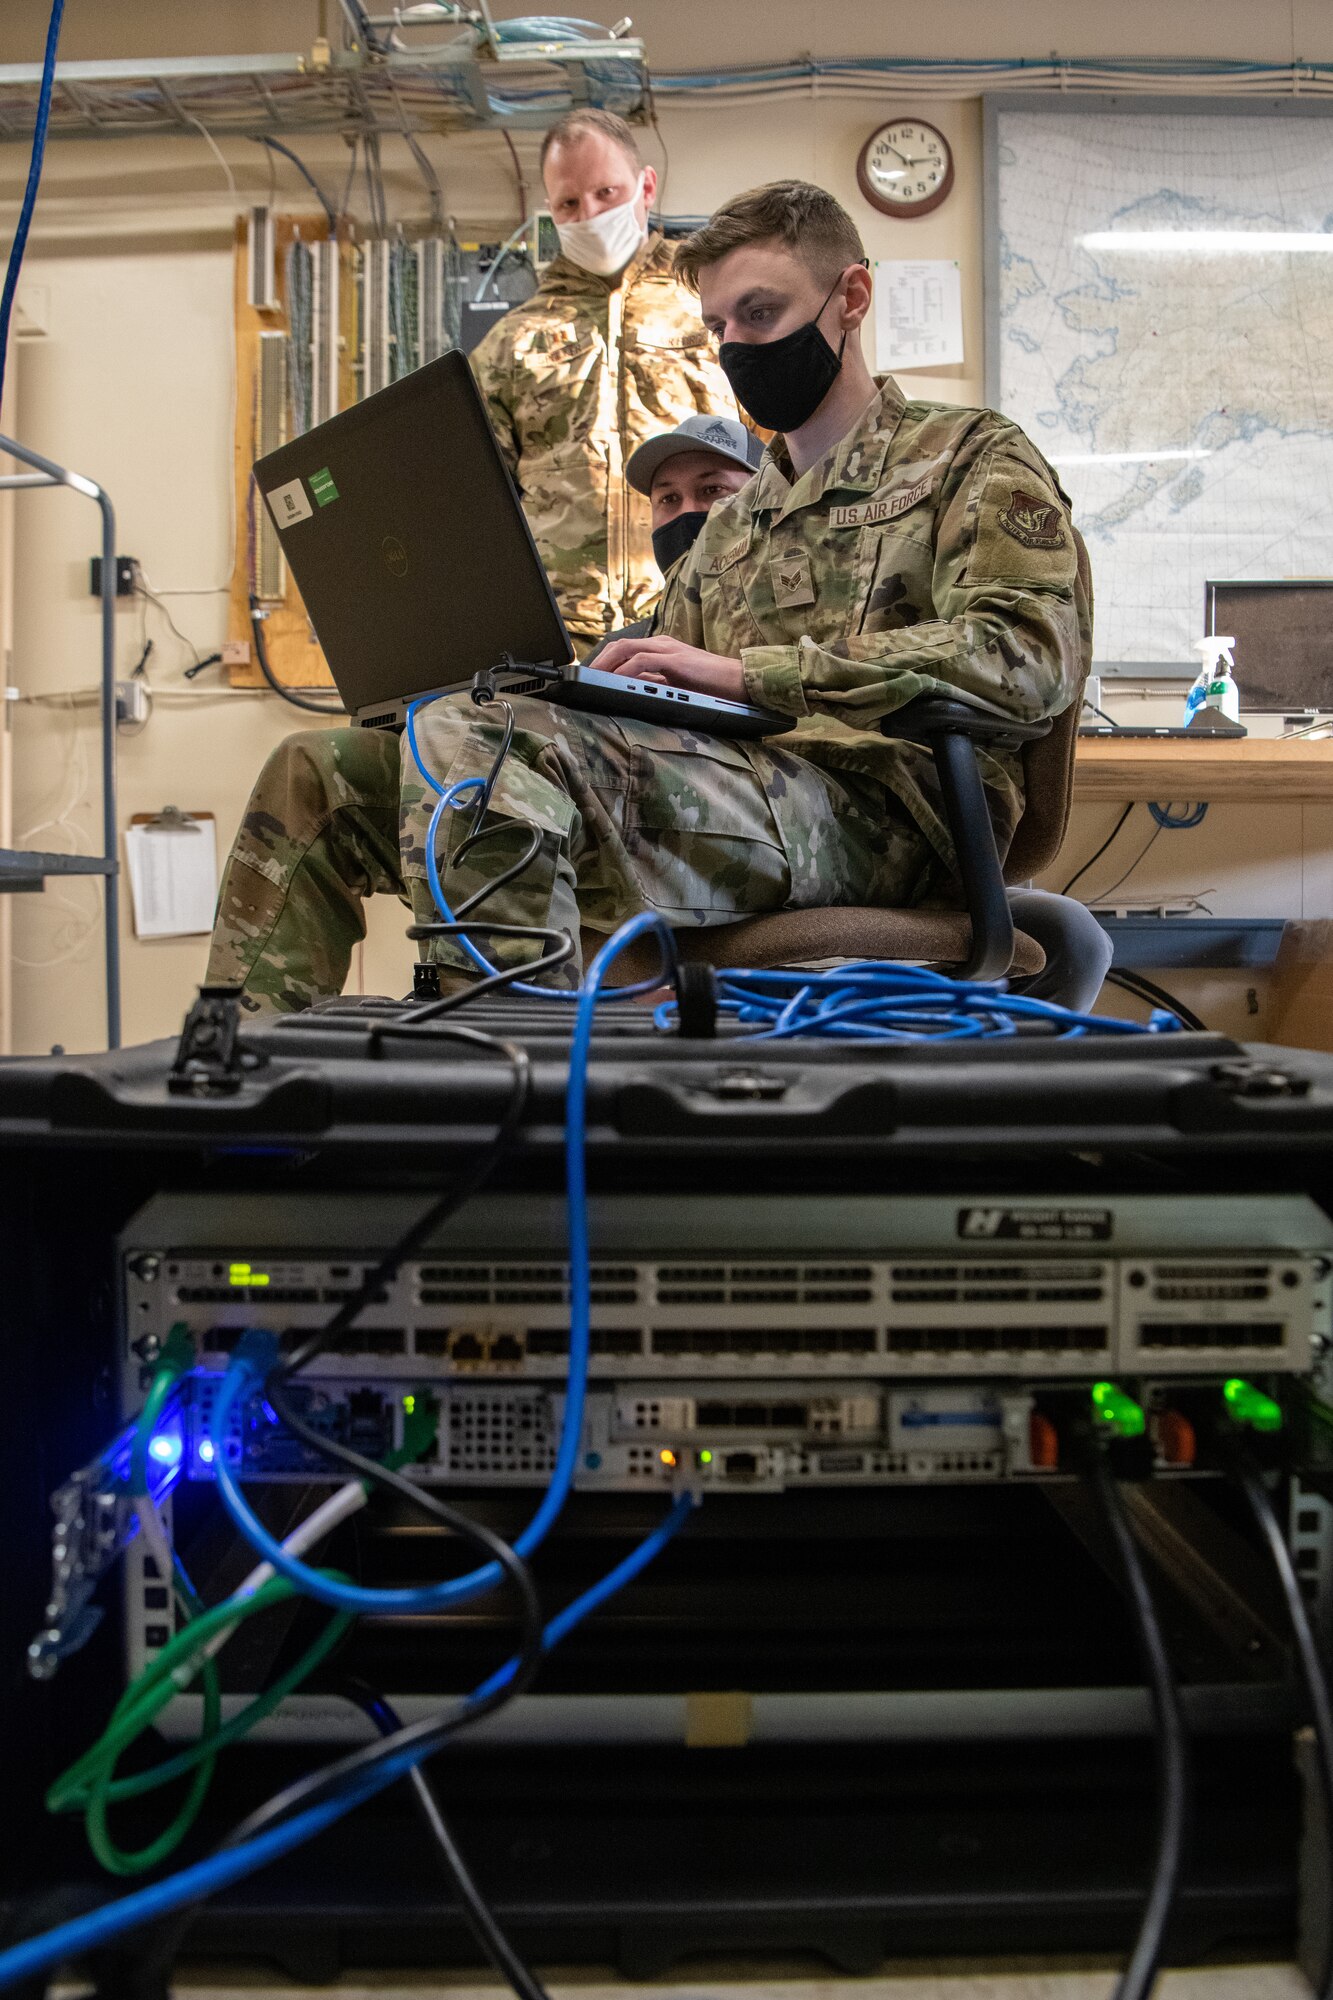 U.S. Air Force Capt. Jake Spuller, left, the 611th Air Communications Squadron Special Missions Flight Commander; Brandon Baldwin, center, 611th ACOMS Mission Defense Team System Administrator; and Senior Airman Samuel Ackerman, right, a 611th ACOMS Mission Defense Team operator, perform cybersecurity measures.